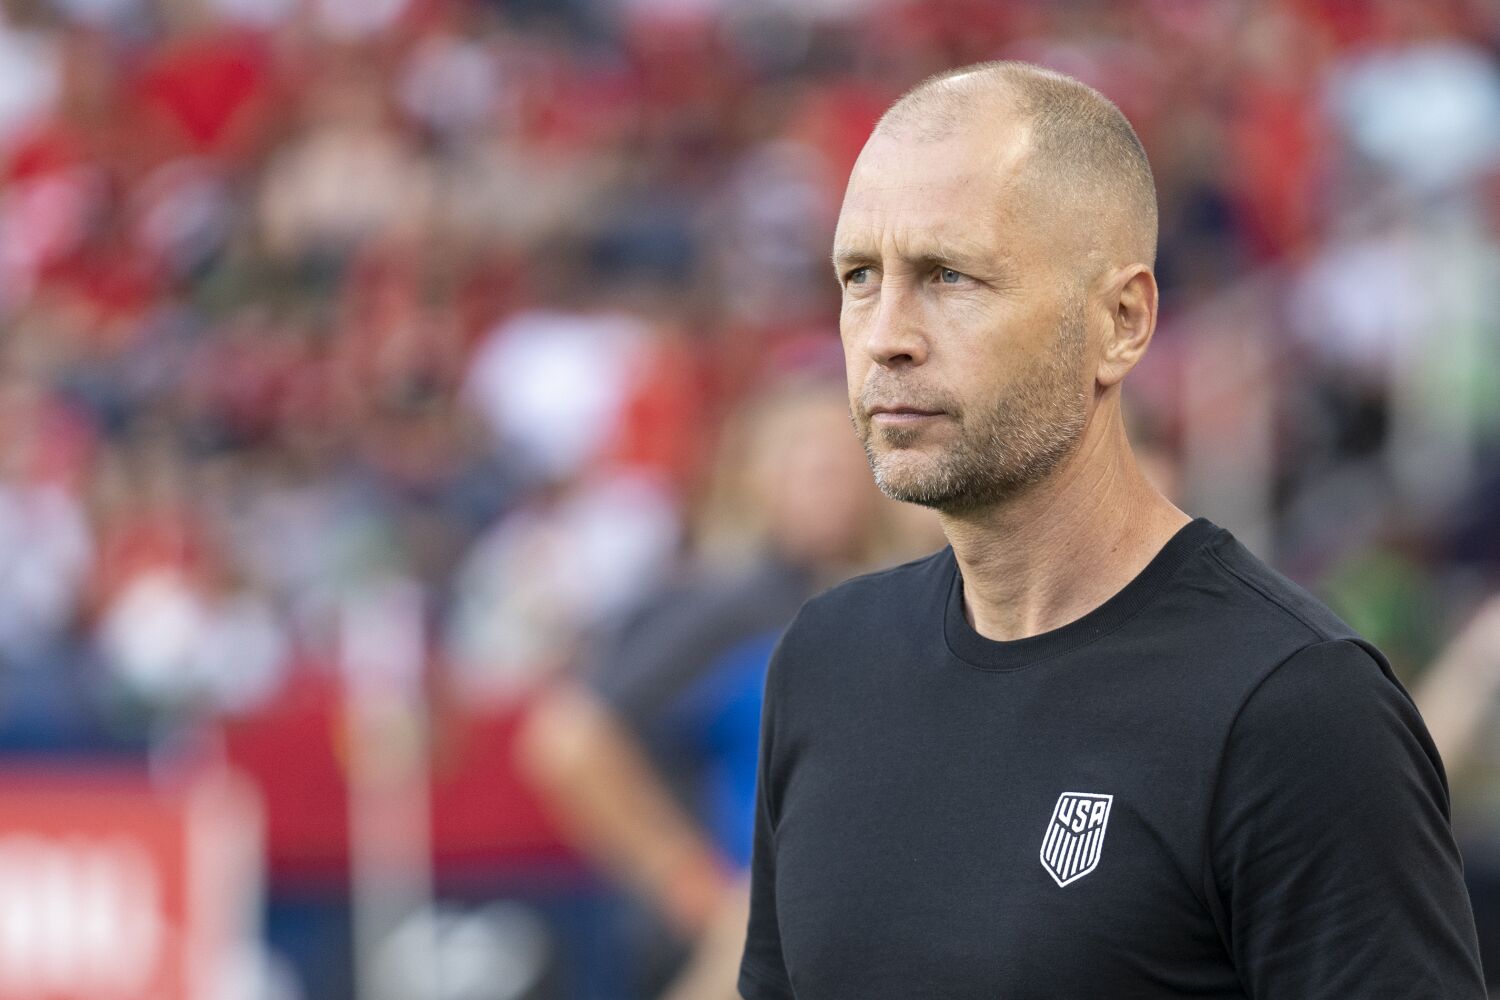 U.S. Soccer loses Earnie Stewart and Brian McBride, and still hasn't replaced Gregg Berhalter